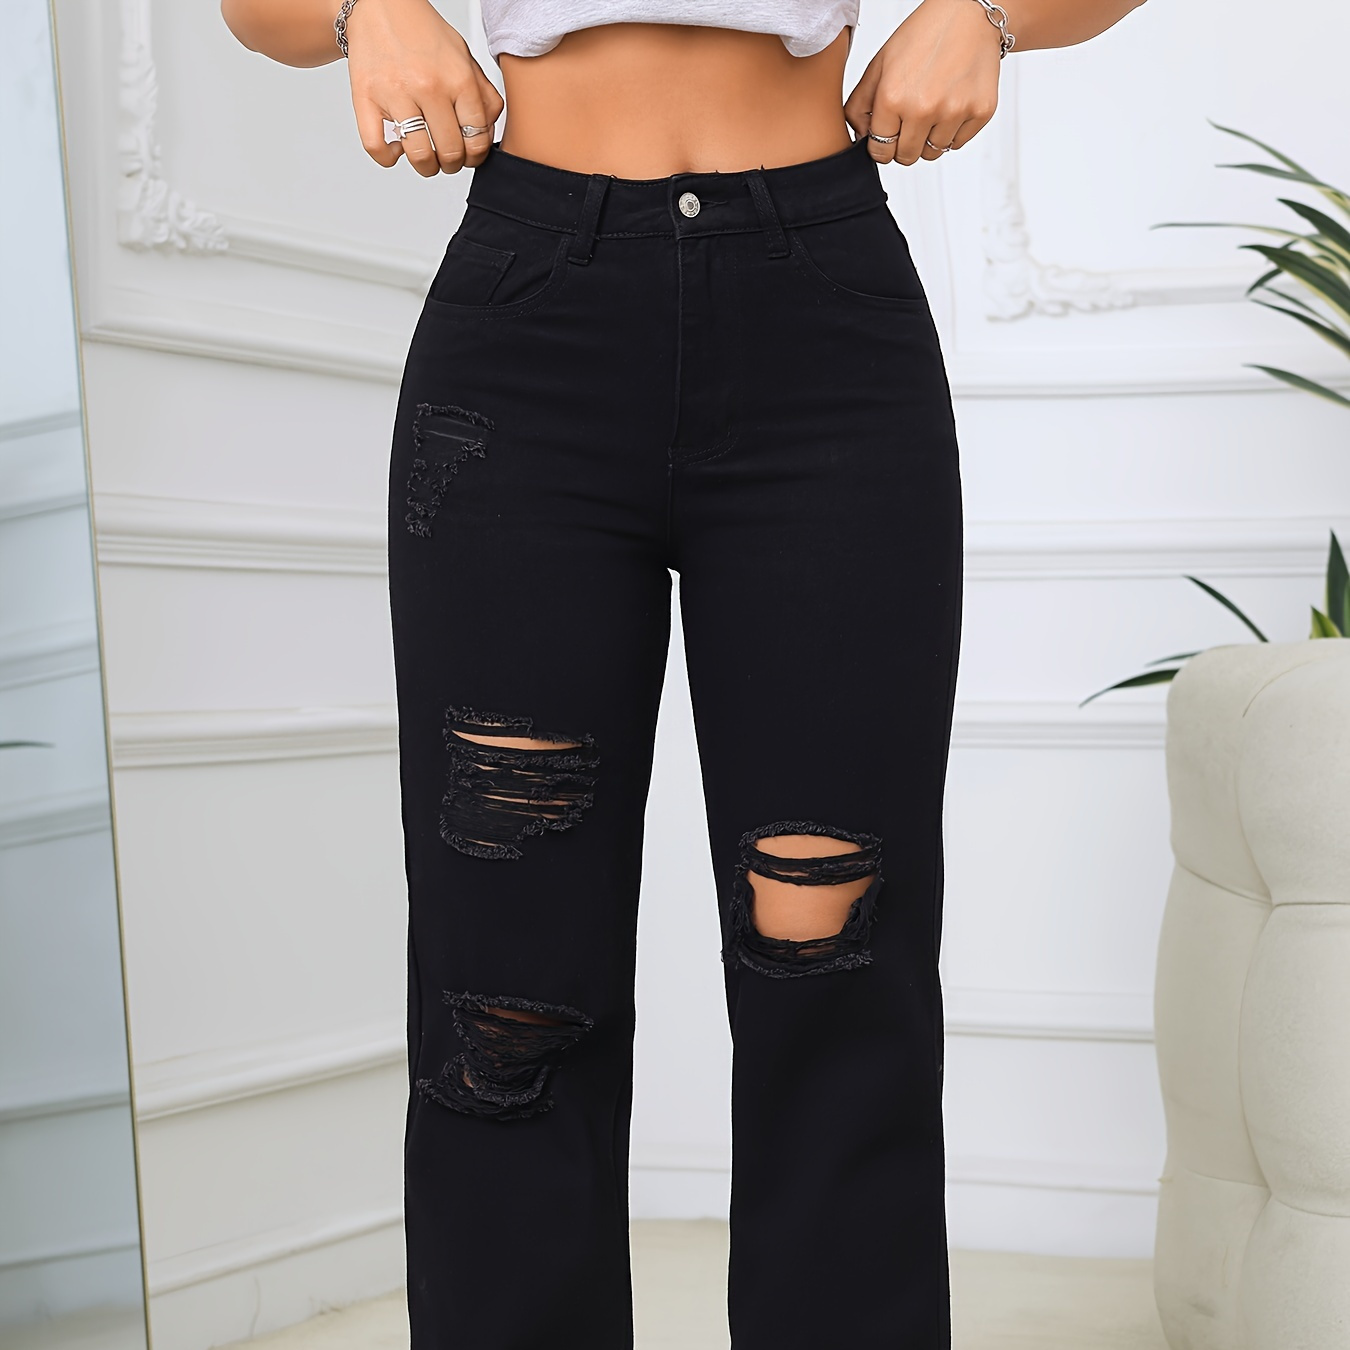 

Women's Fashion Plain Black Color Ripped Wide Leg Jeans, Casual Style, High-waisted Denim Pants, Distressed Look, With Pockets